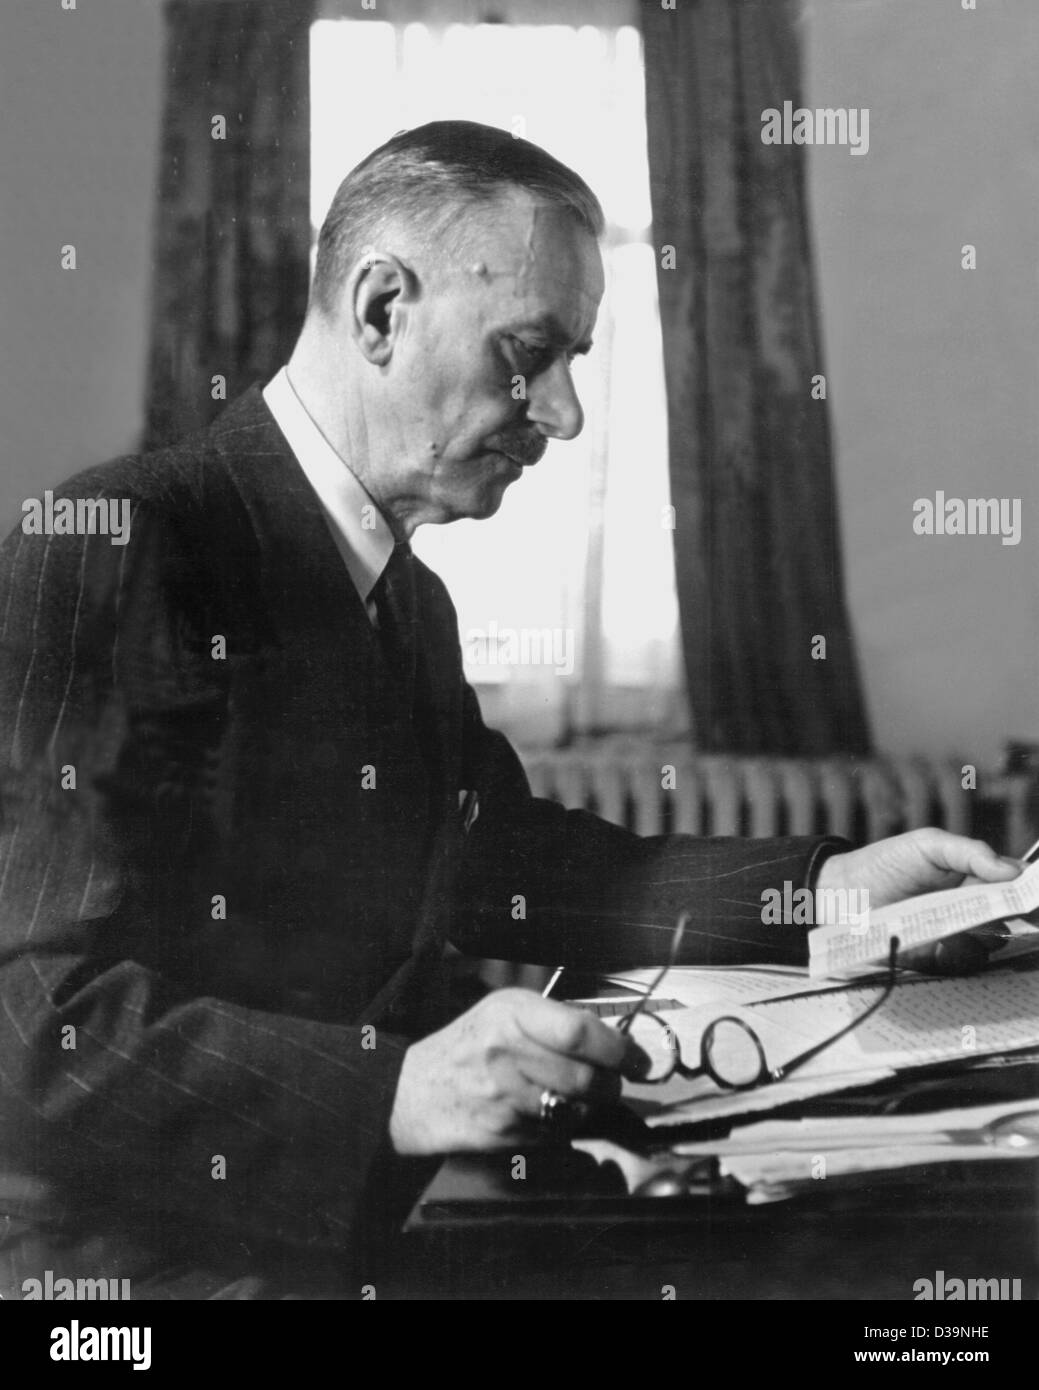 (dpa) - German author Thomas Mann (undated filer). His first novel 'Buddenbrooks' (1901) made him world-famous. Other important works are 'Death in Venice' (1912), 'The Magic Mountain' (1924) and 'Confessions of Felix Krull' (1954). He received the Noble Prize in literature in 1929. As critic of the Stock Photo